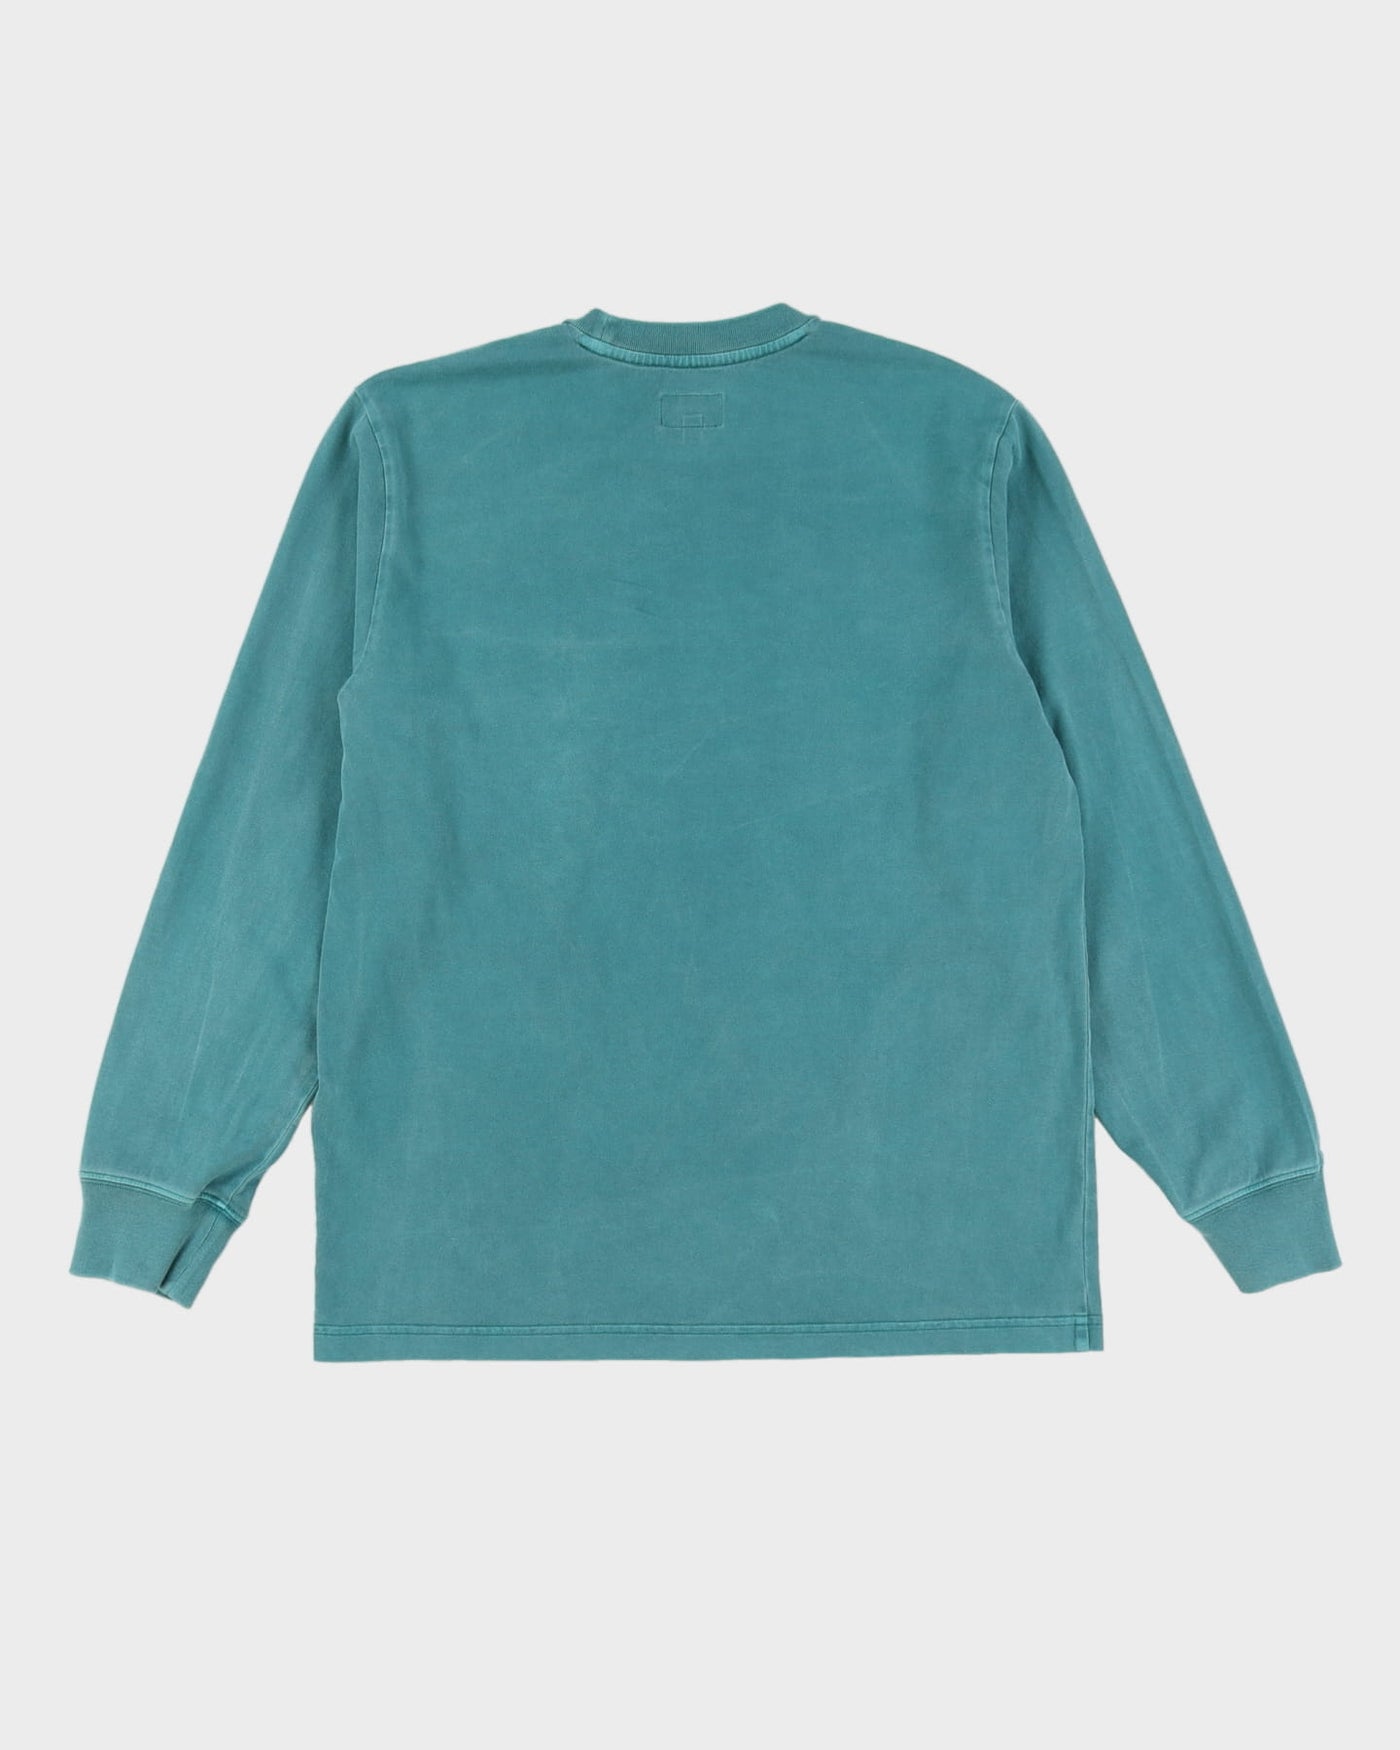 Supreme Green Over-Dyed Long Sleeve T-Shirt - S